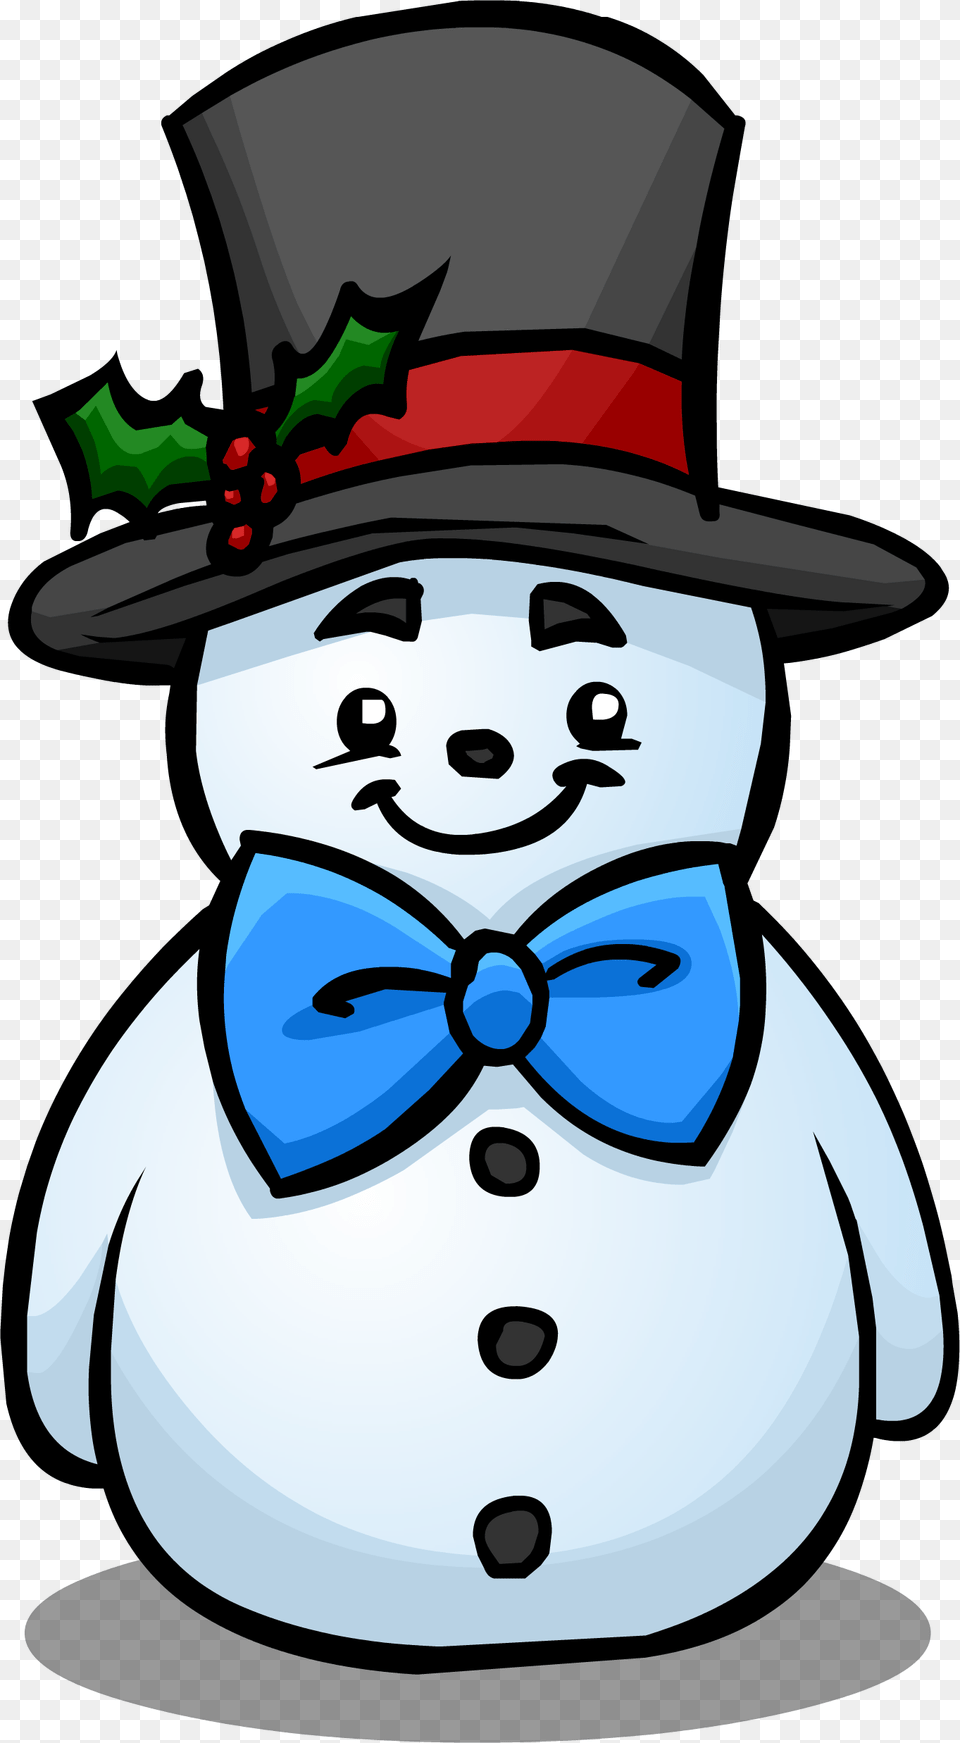 Top Hat Snowman Sprite 001 Snowman With Top Hat, Accessories, Tie, Winter, Outdoors Free Png Download